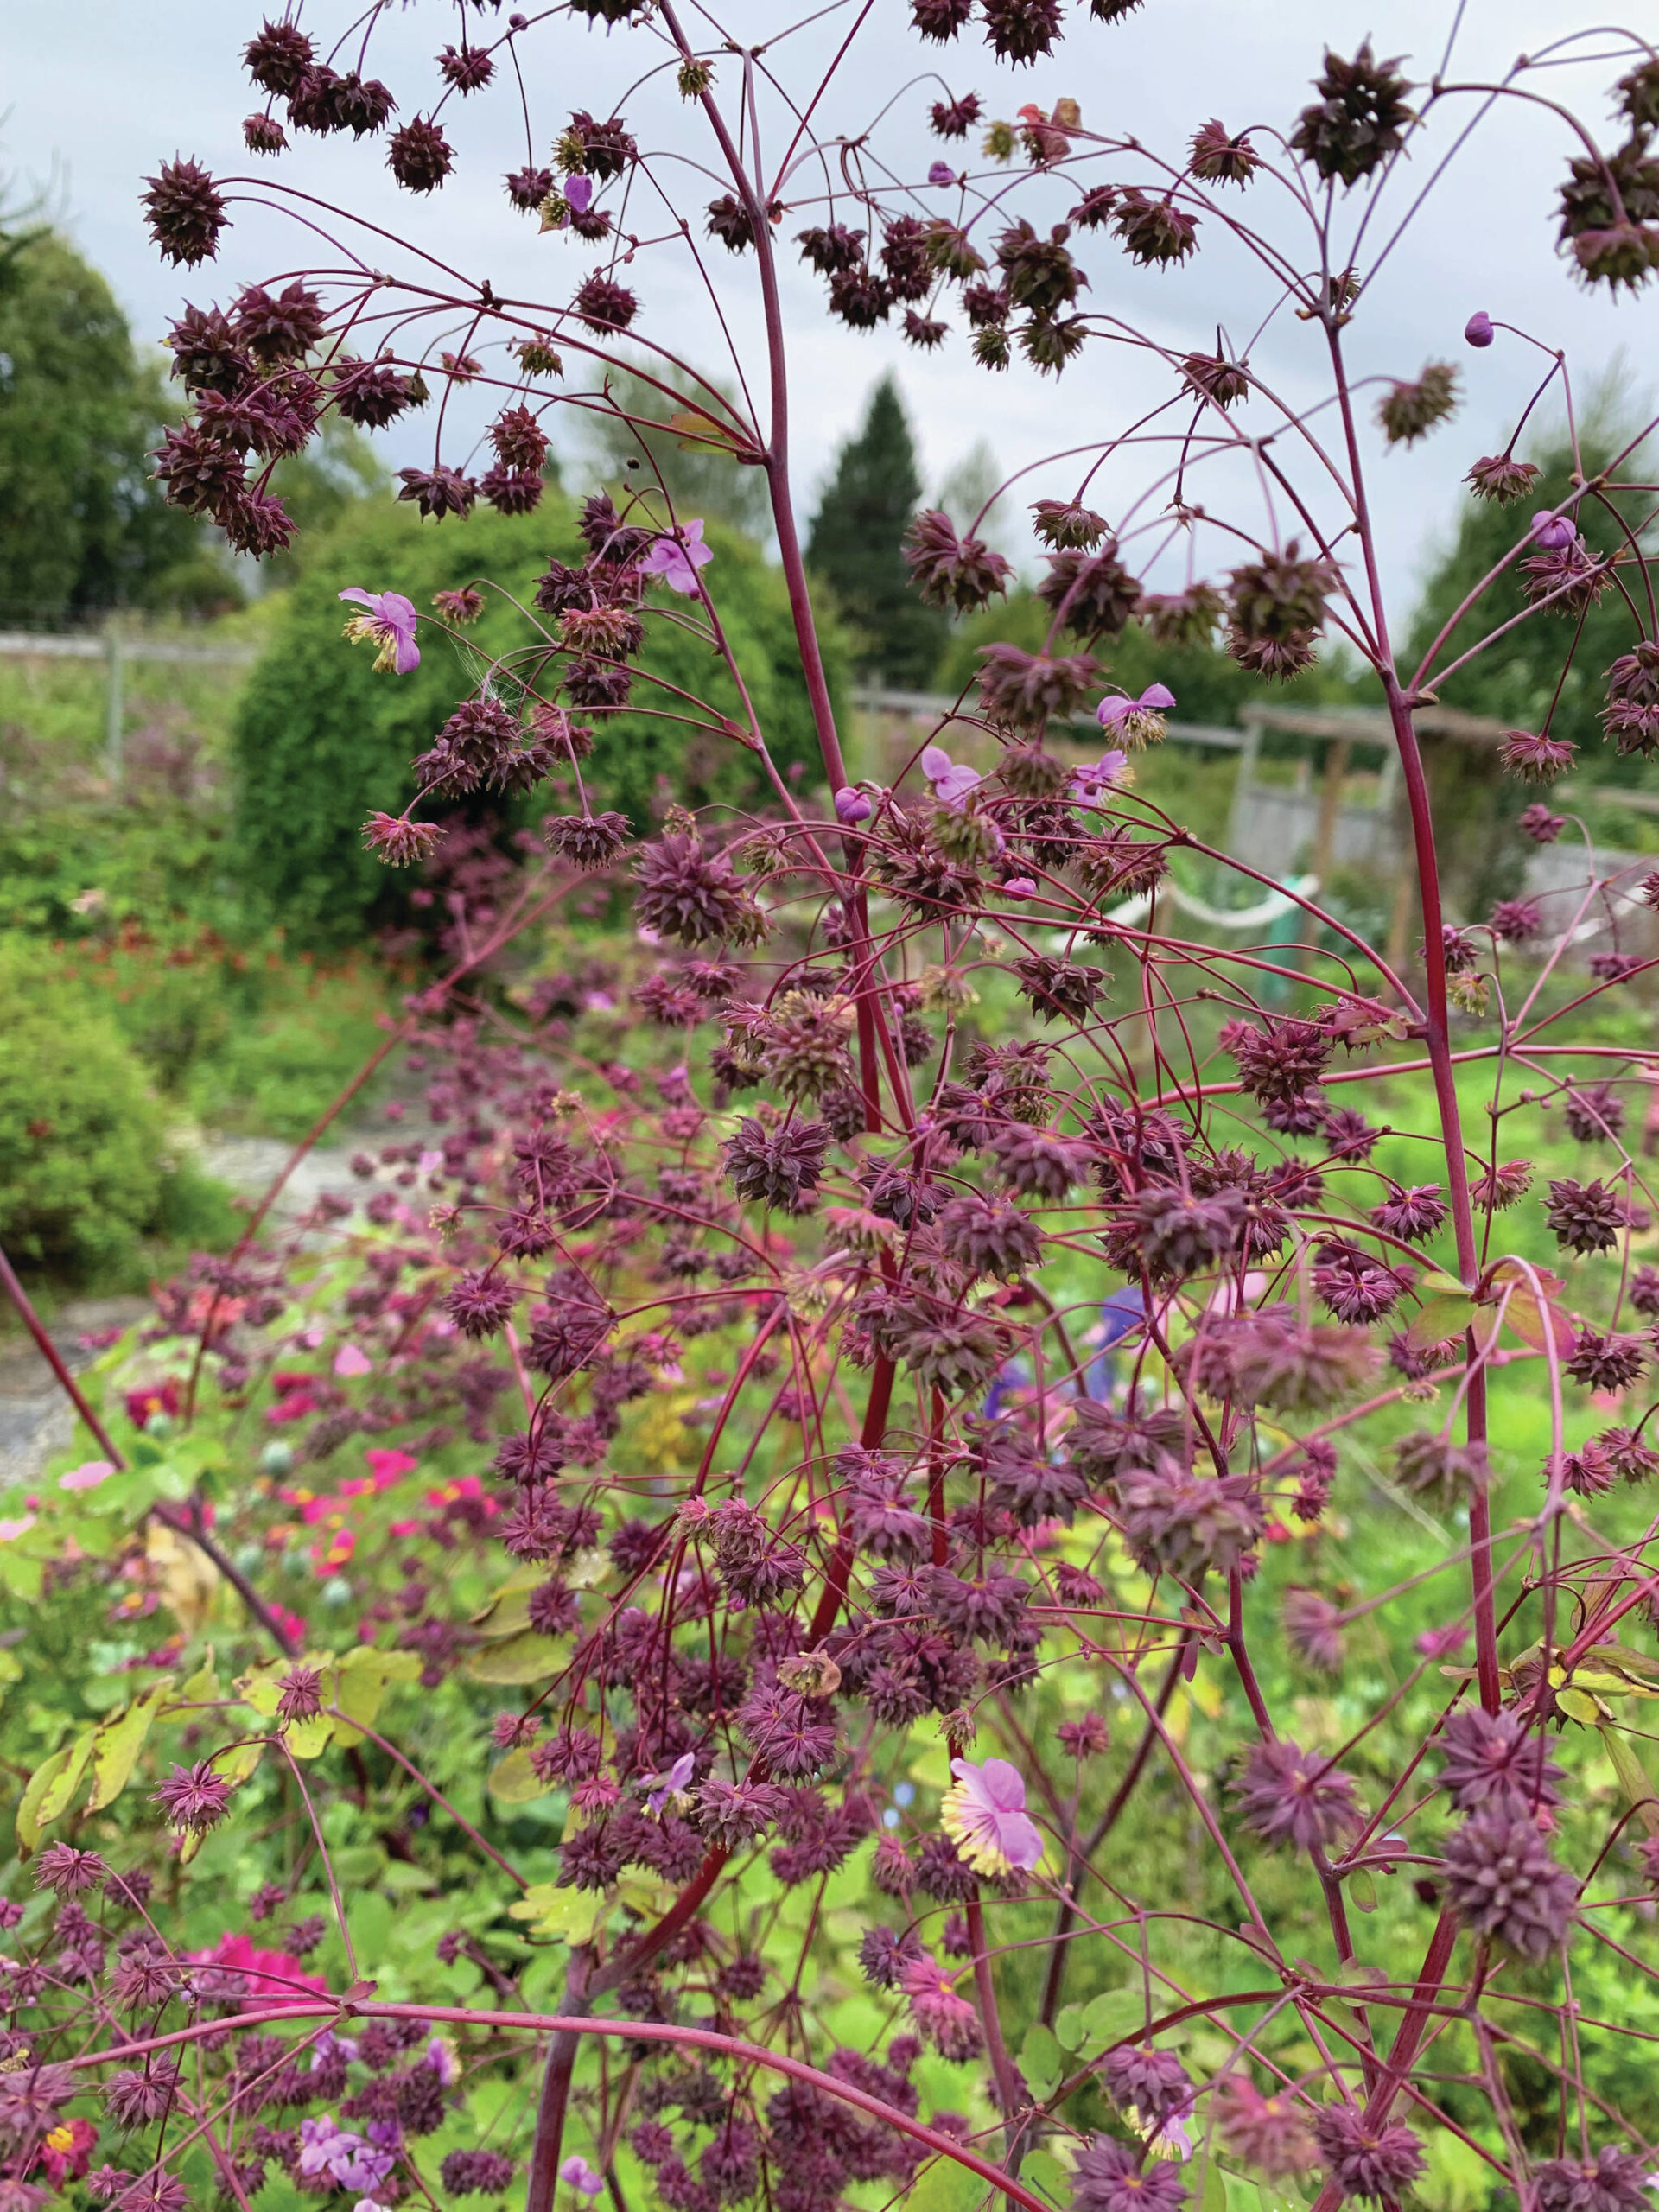 Thalictrum seed heads are just waiting to make way too many seedlings. (Photo by Rosemary Fitzpatrick)